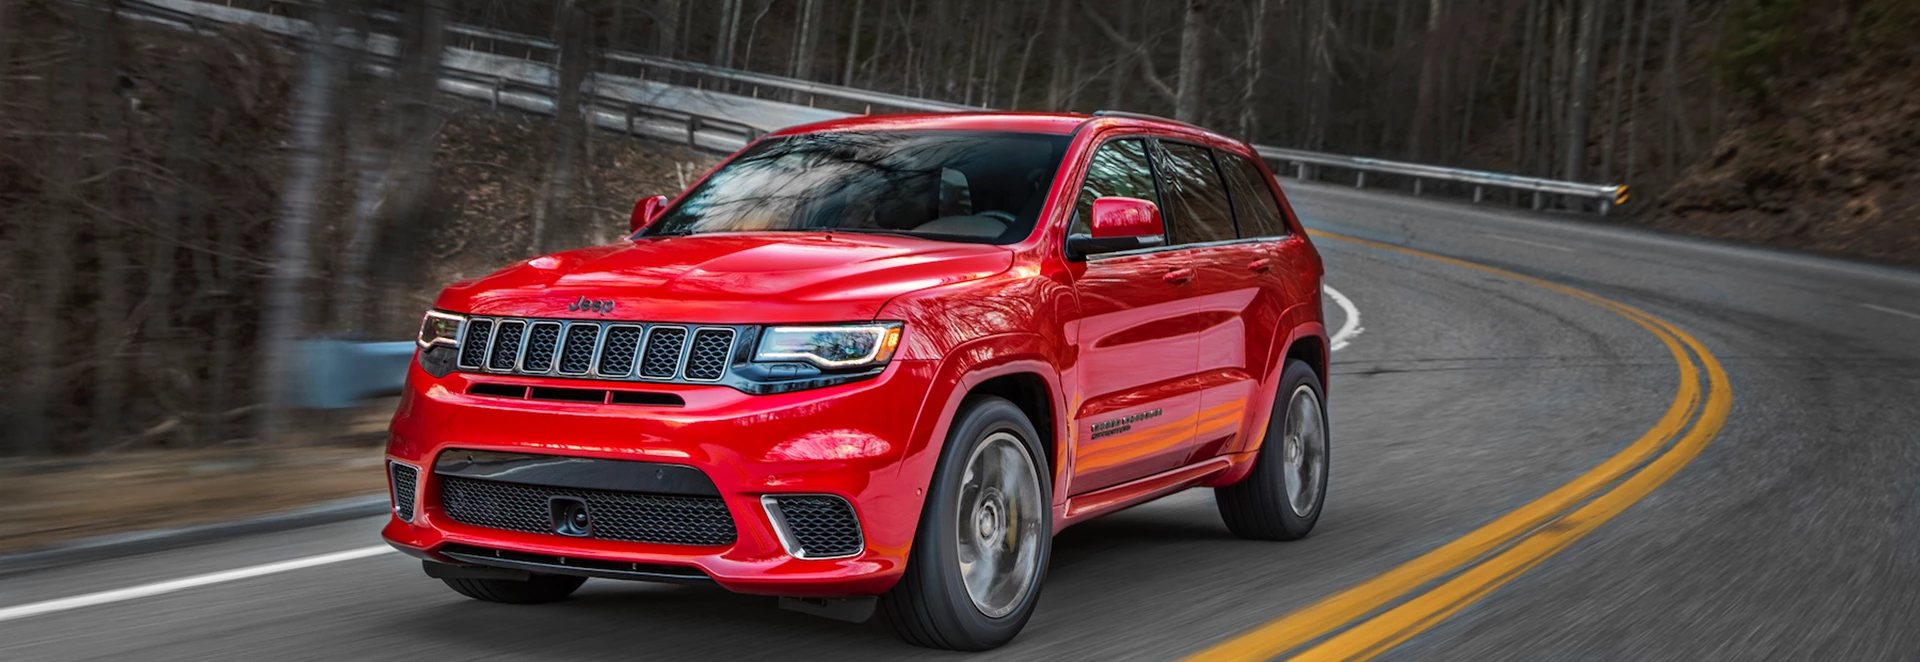 Buyer’s guide to the Jeep Grand Cherokee 